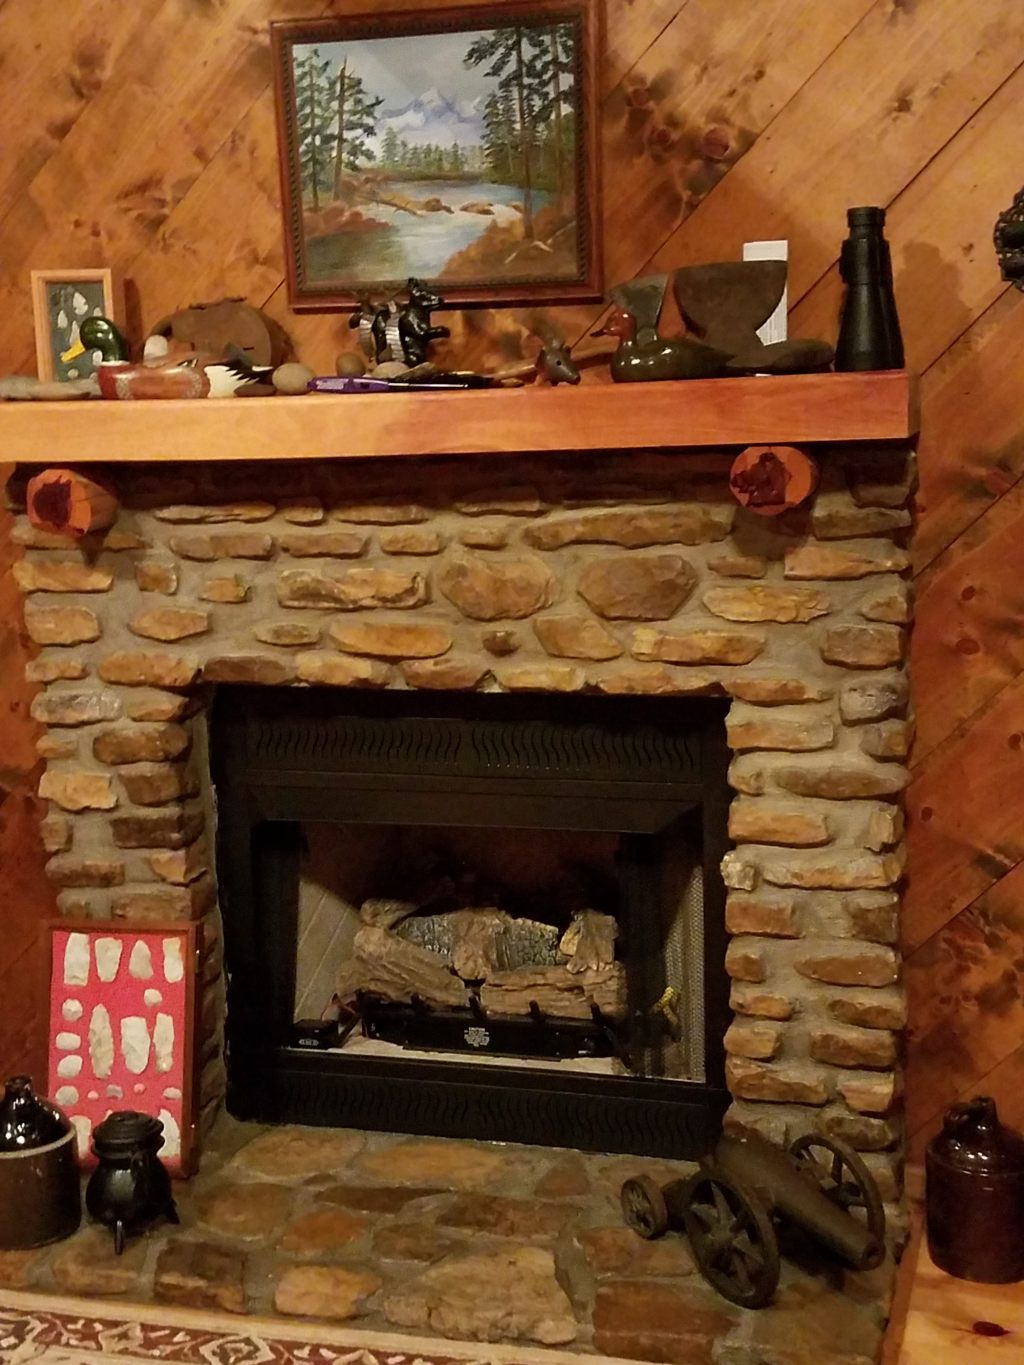 The fireplace.  Relics in frame on left found in Missouri when I lived there in the 1970's.  To the right is a civil war signal canon, heavy.
Very Ear